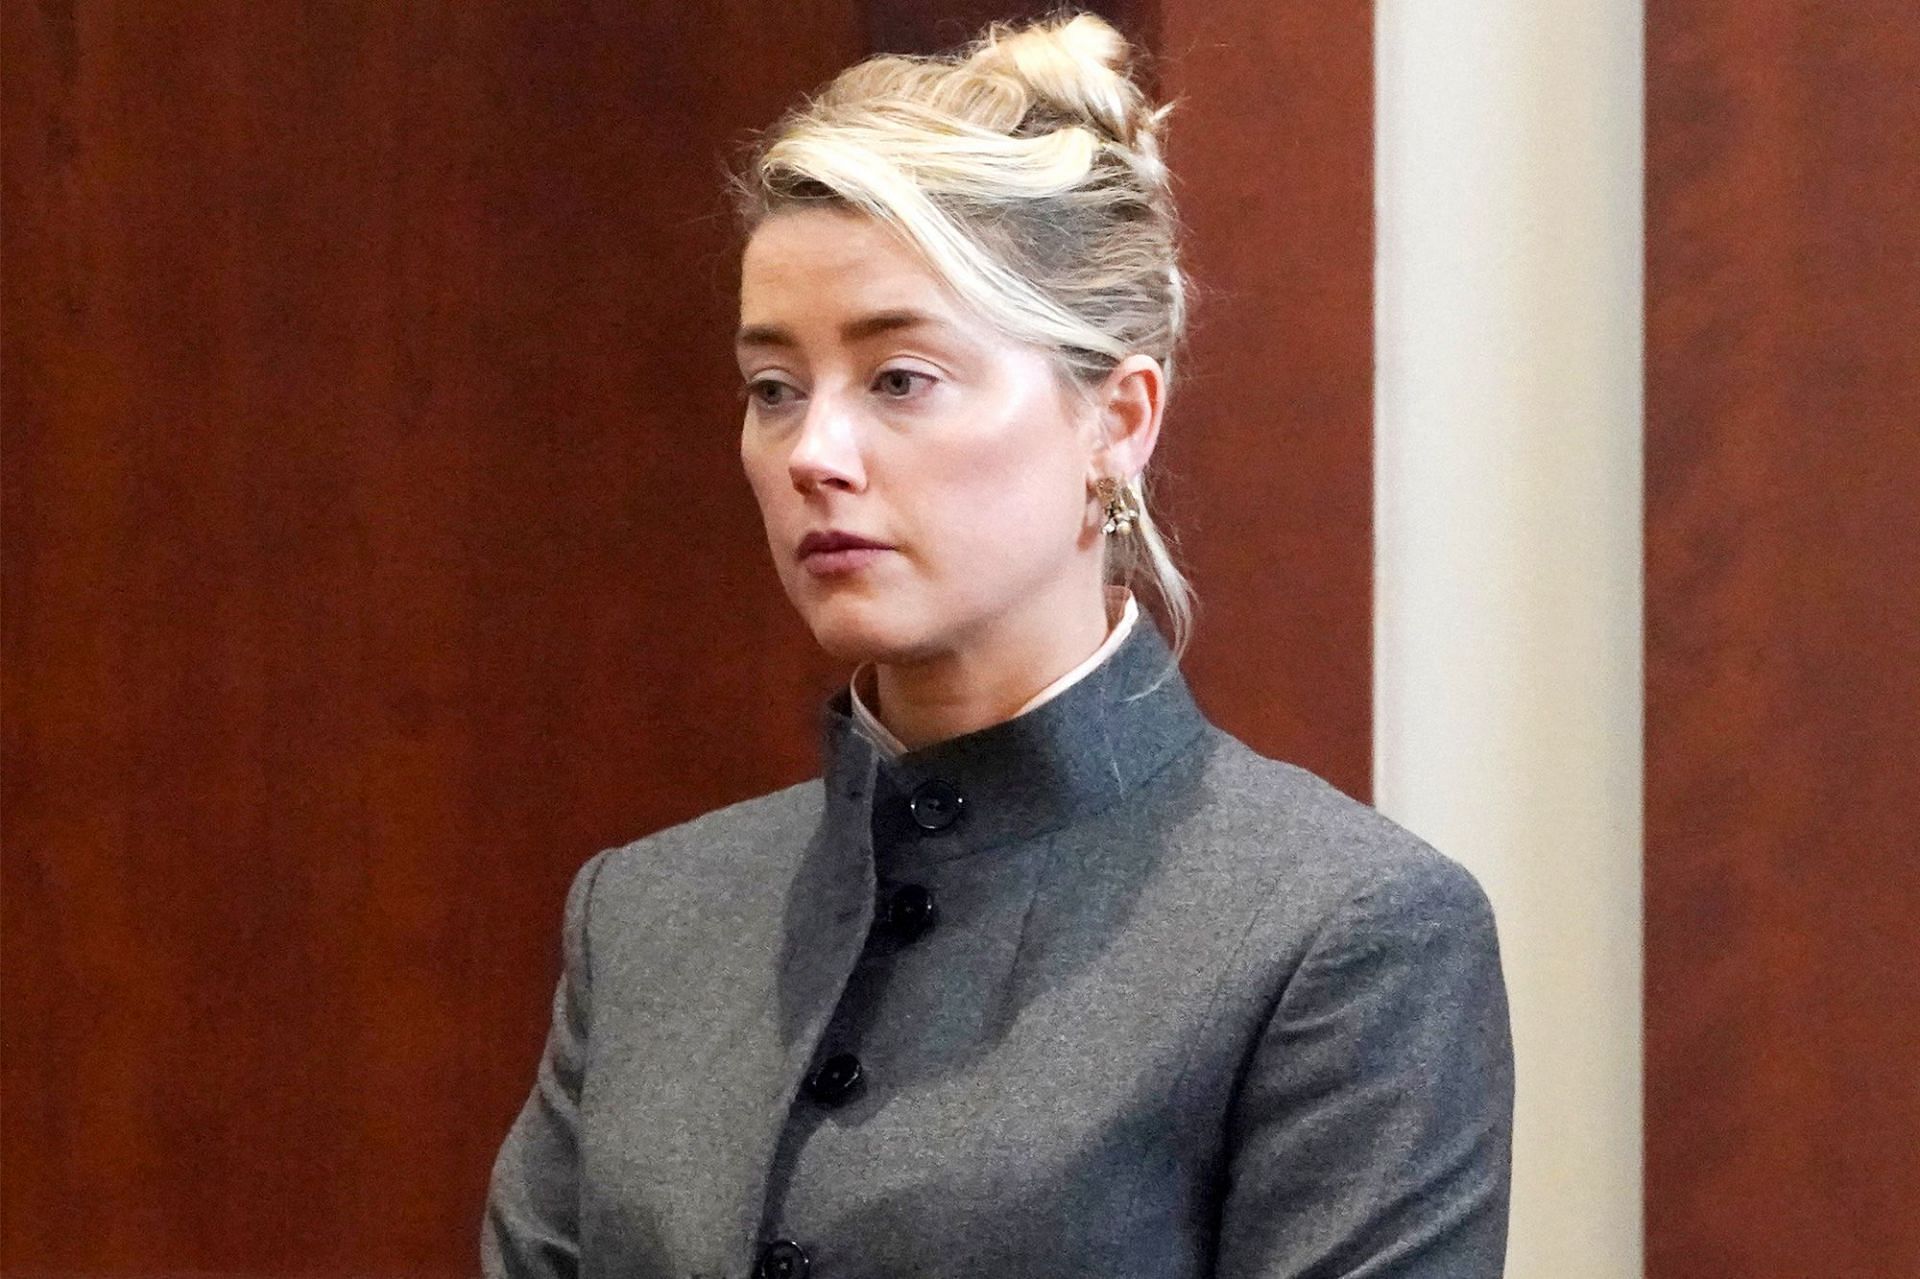 Amber Heard paid $6 million in lawyers&rsquo; fees ( Image via STEVE HELBER / Getty Images)